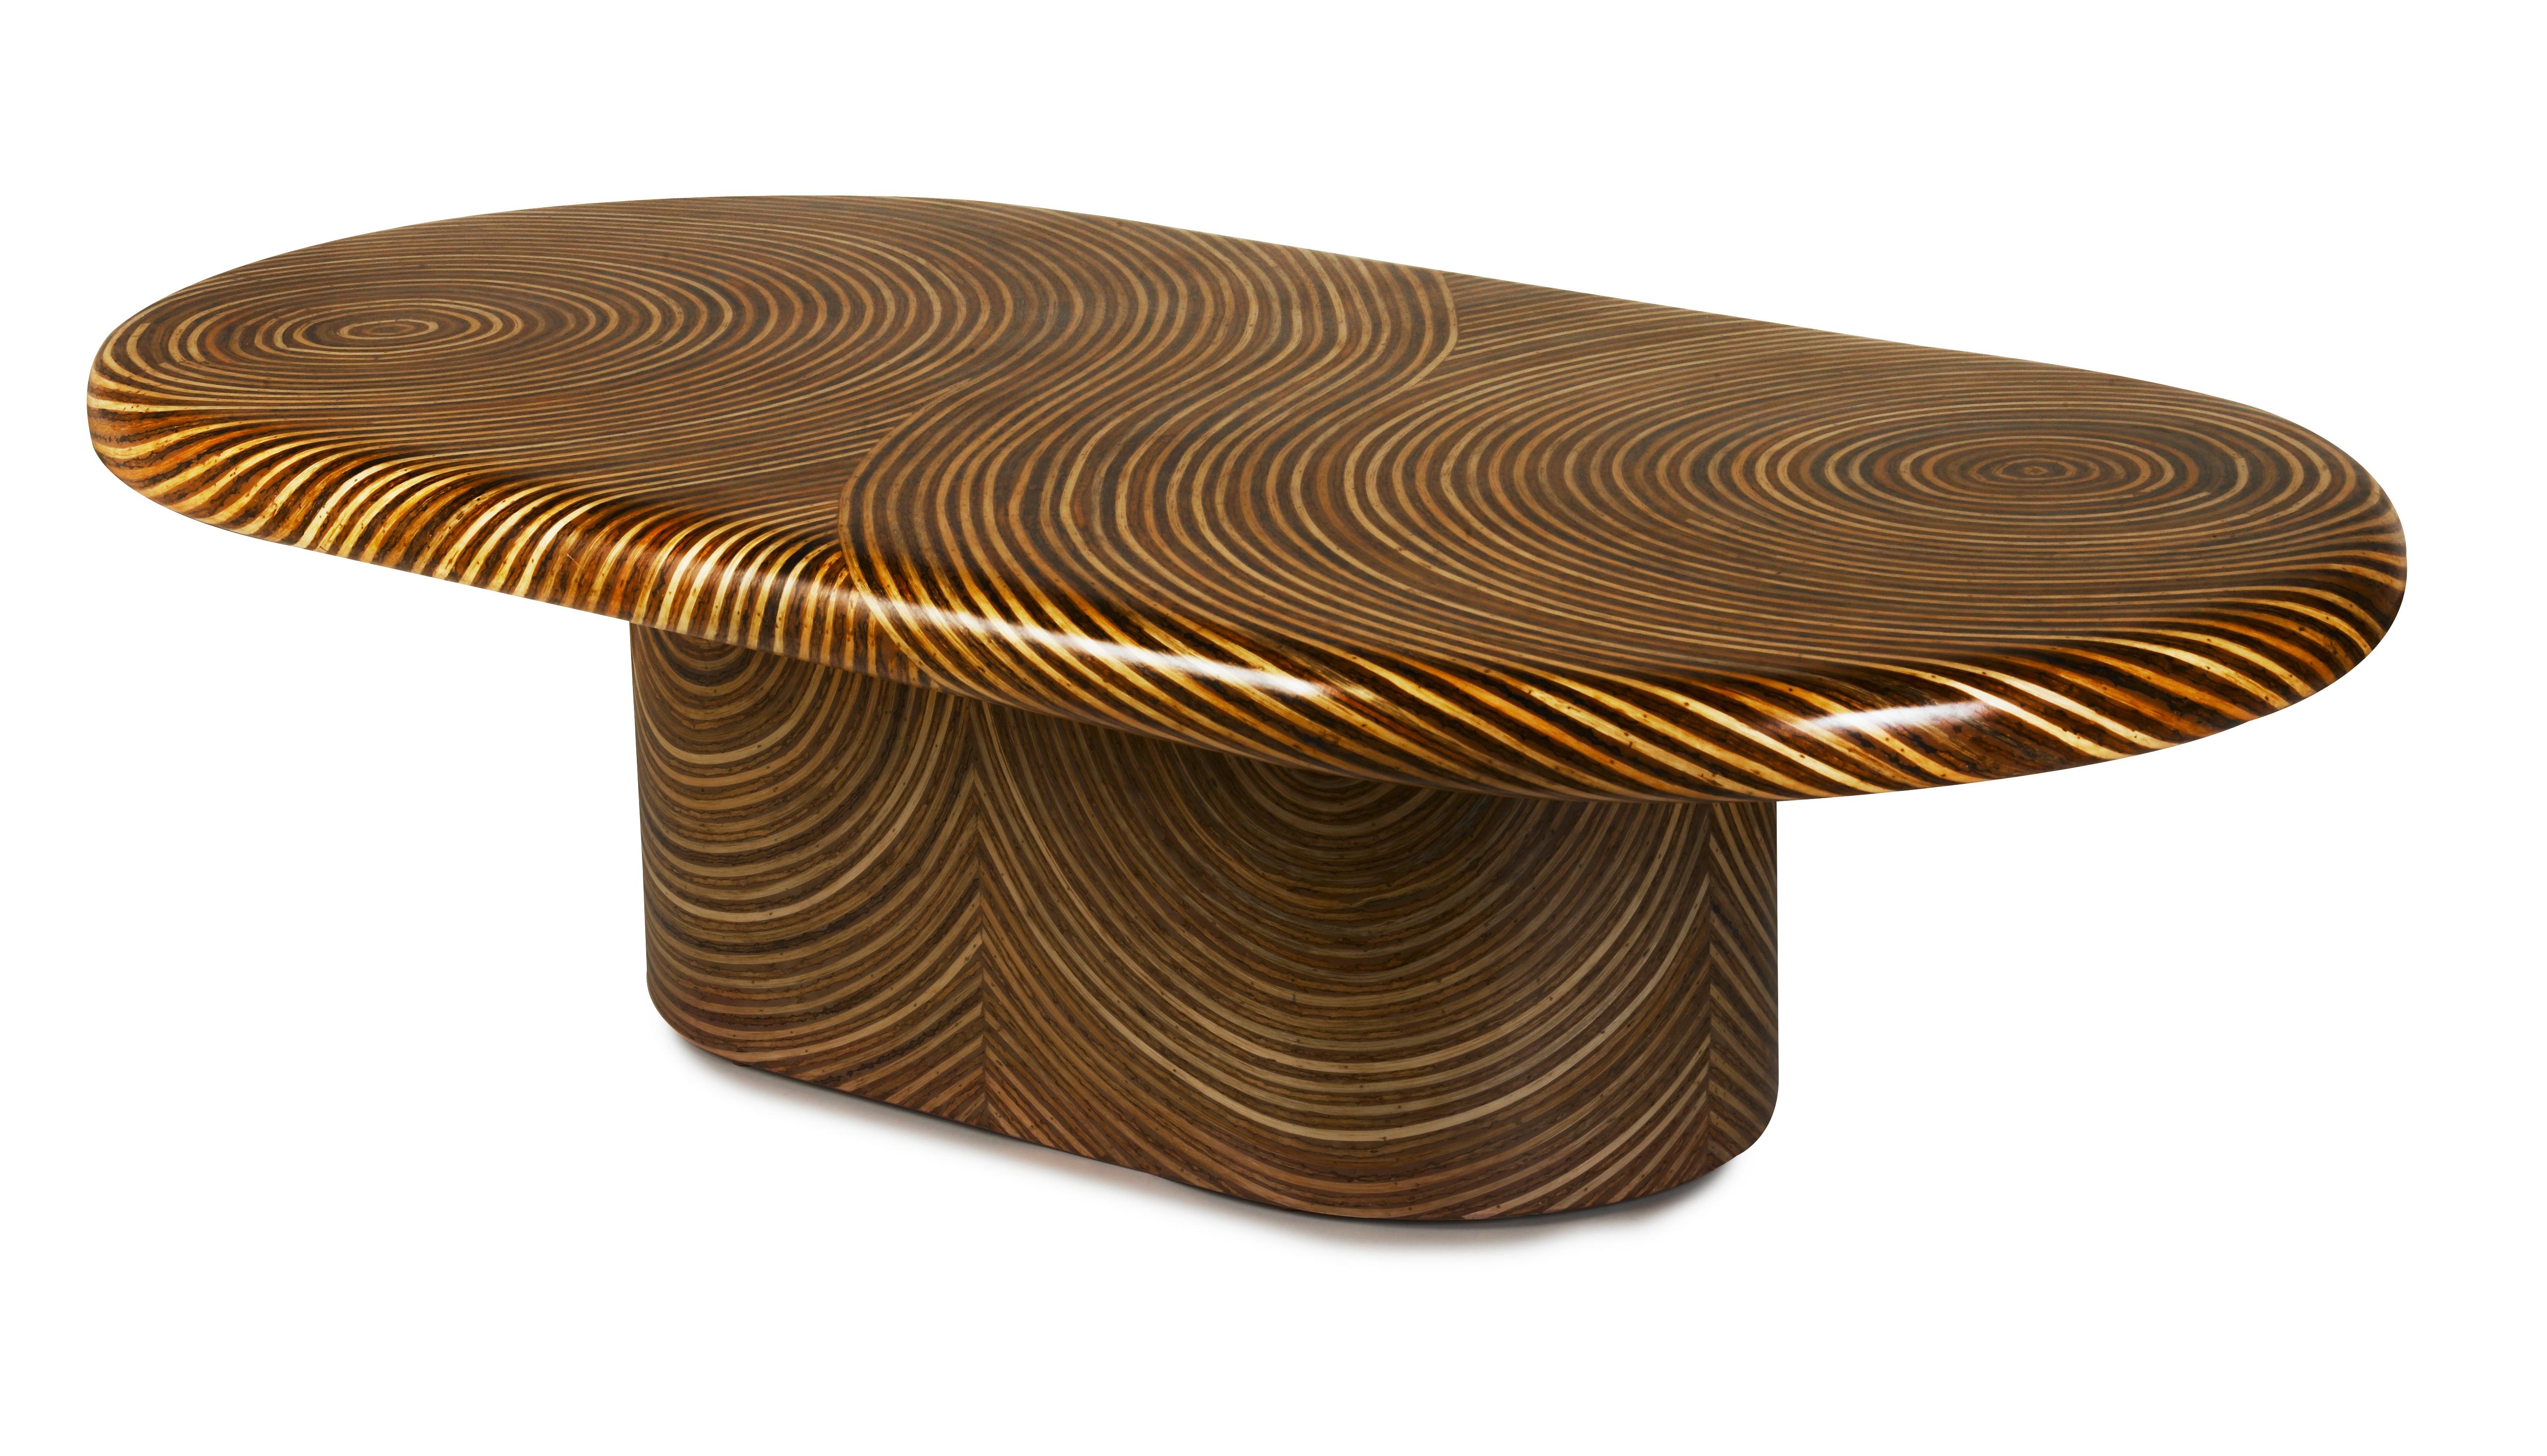 Swirling patterns are crafted through the artful inlay of rattan ribbons. The captivating 